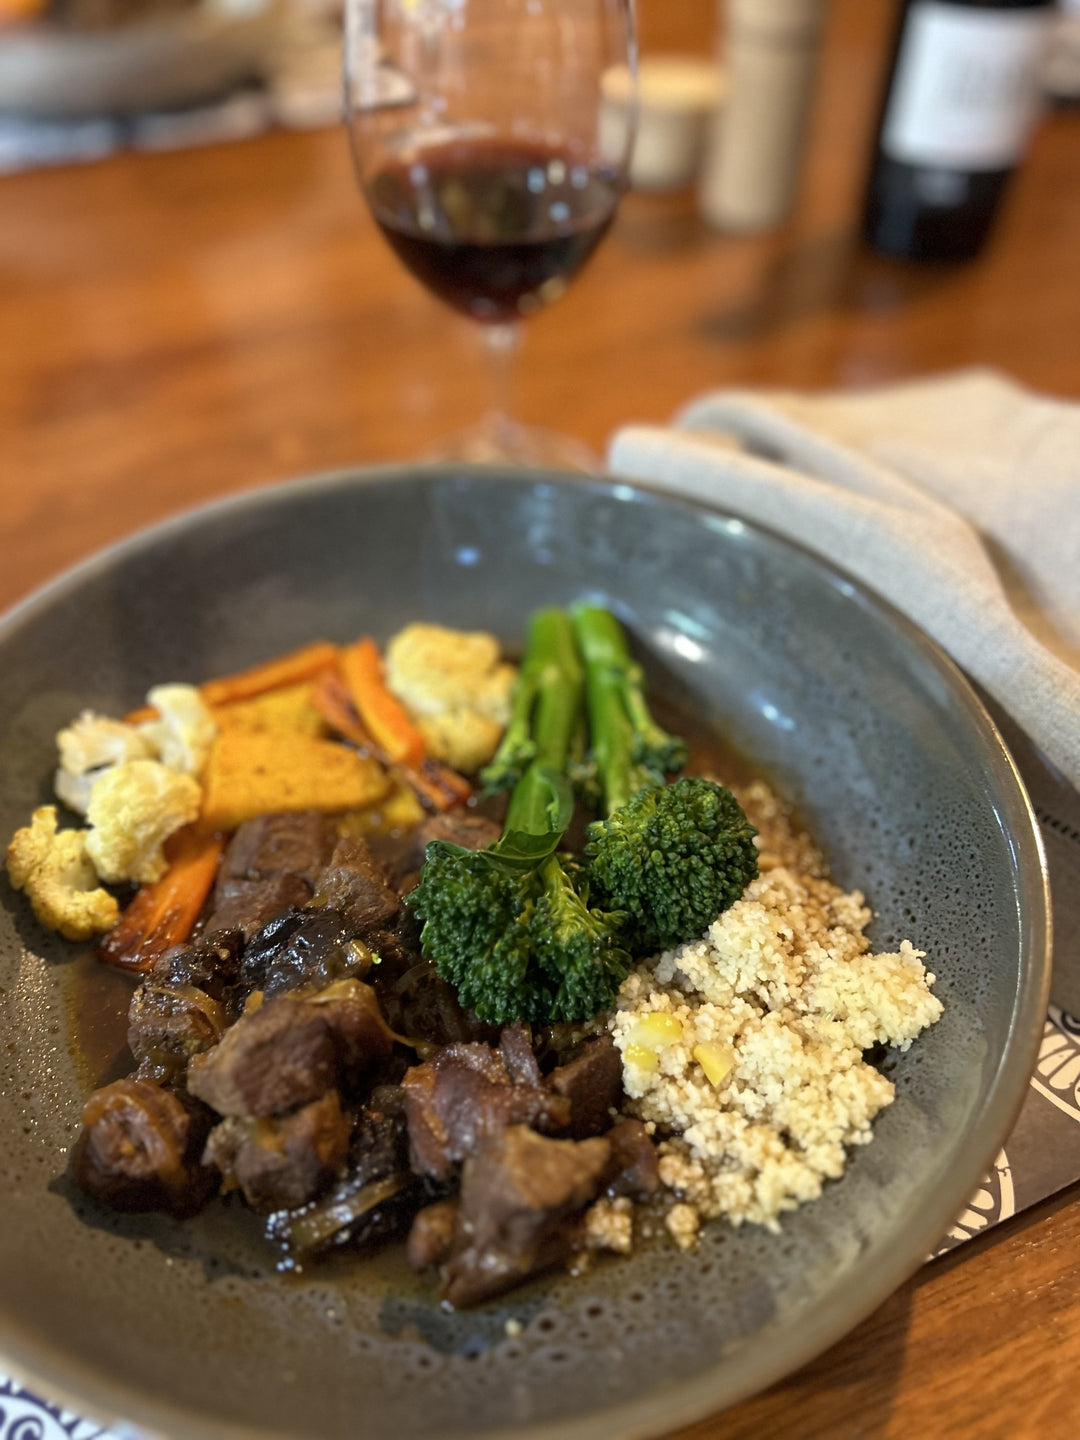 RECIPE - Slow Cooked Turkish Lamb with Prunes & Saffron